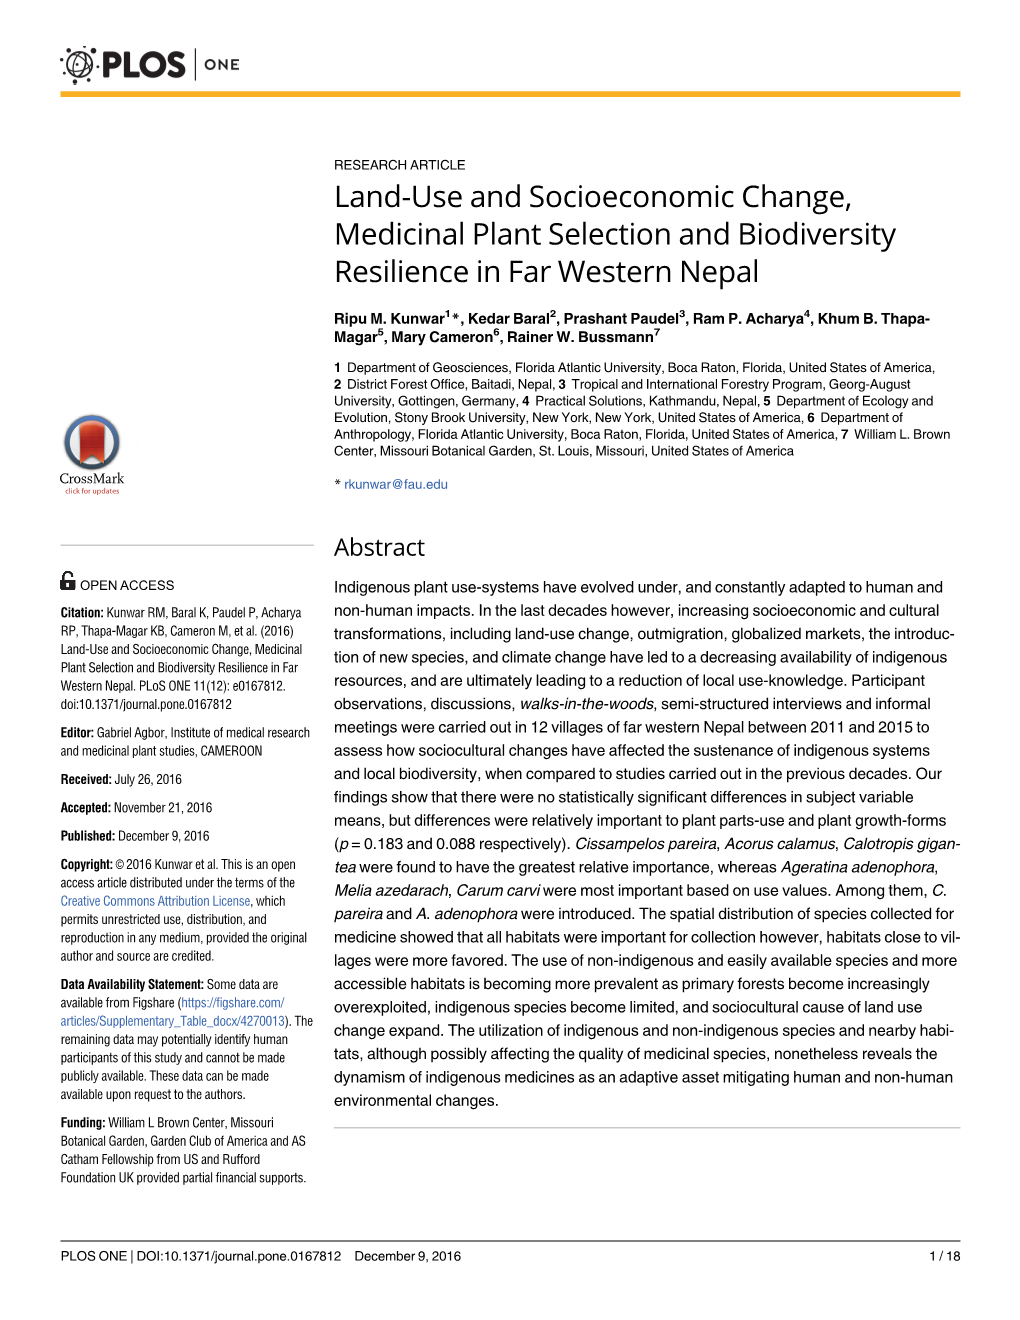 Land-Use and Socioeconomic Change, Medicinal Plant Selection and Biodiversity Resilience in Far Western Nepal